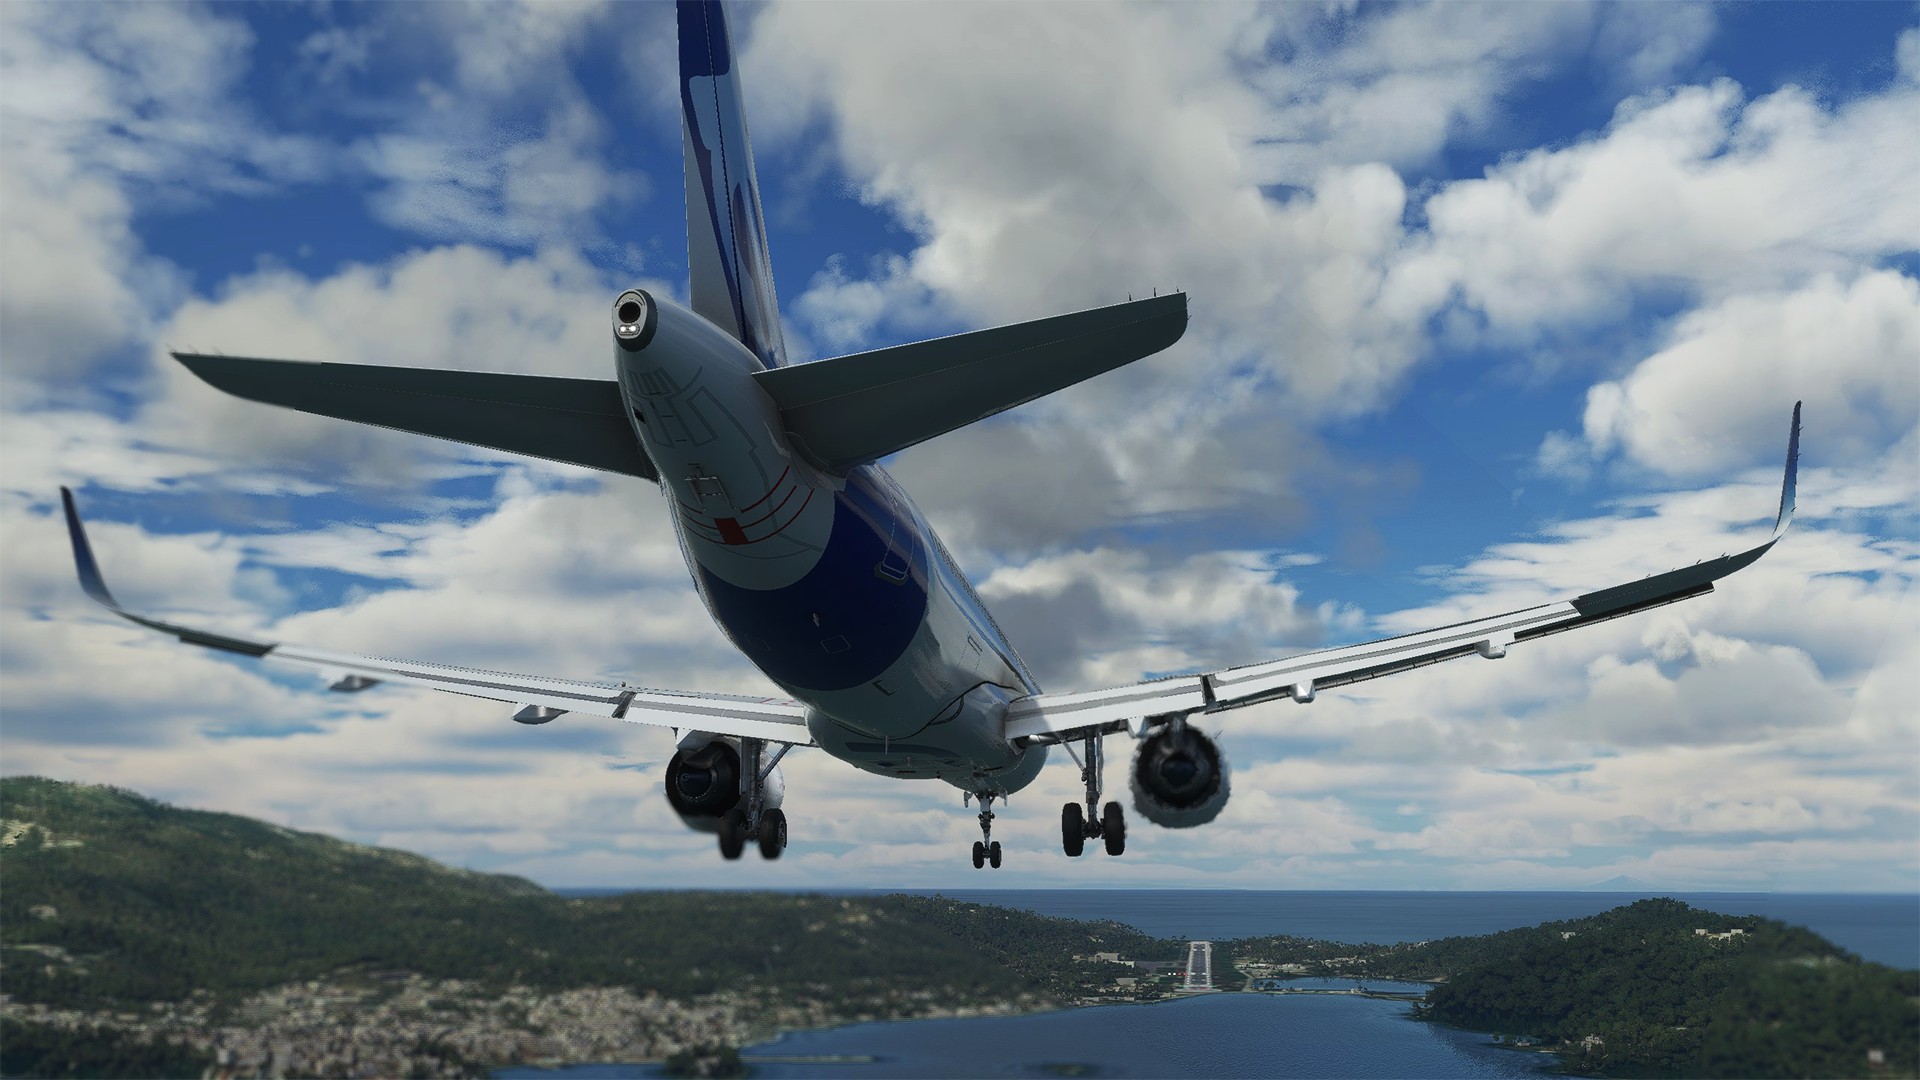 Get VR Ready - A Guide to Flight Simulator v1.80 Now Available - SoFly